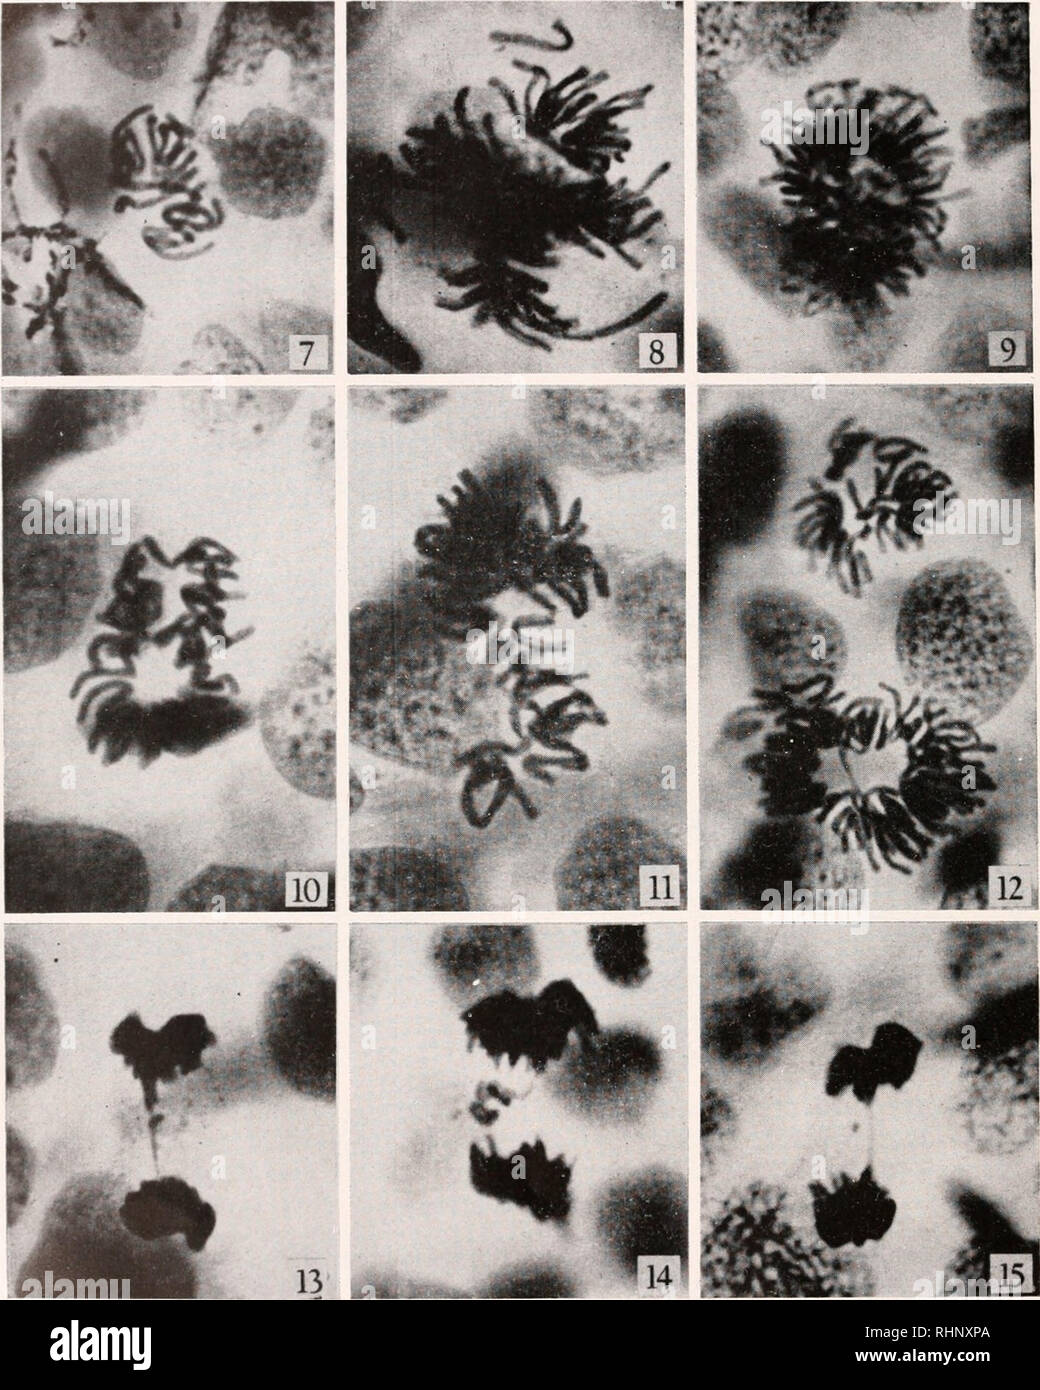 . The Biological bulletin. Biology; Zoology; Biology; Marine Biology. 390 DONALD P. COSTELLO AND CATHERINE HEXLKY. PLATE I Photomicrographs of mitotic figures from tail-tips of shipped T. torosus larvae. Magnifica- tions: Figures 7, 8, 14: 1100 X ; Figures 9, 12: 960 X ; Figures 10, 11, 13, 15: 1160 X. Reduced 20% off. FIGURE 7. Haploid metaphase (same as Fig. 1), with 11 chromosomes counted. FIGURE 8. Pentaploid metaphase, with 46 chromosomes counted. Most of the chromo- somes in the figure are split.. Please note that these images are extracted from scanned page images that may have been dig Stock Photo